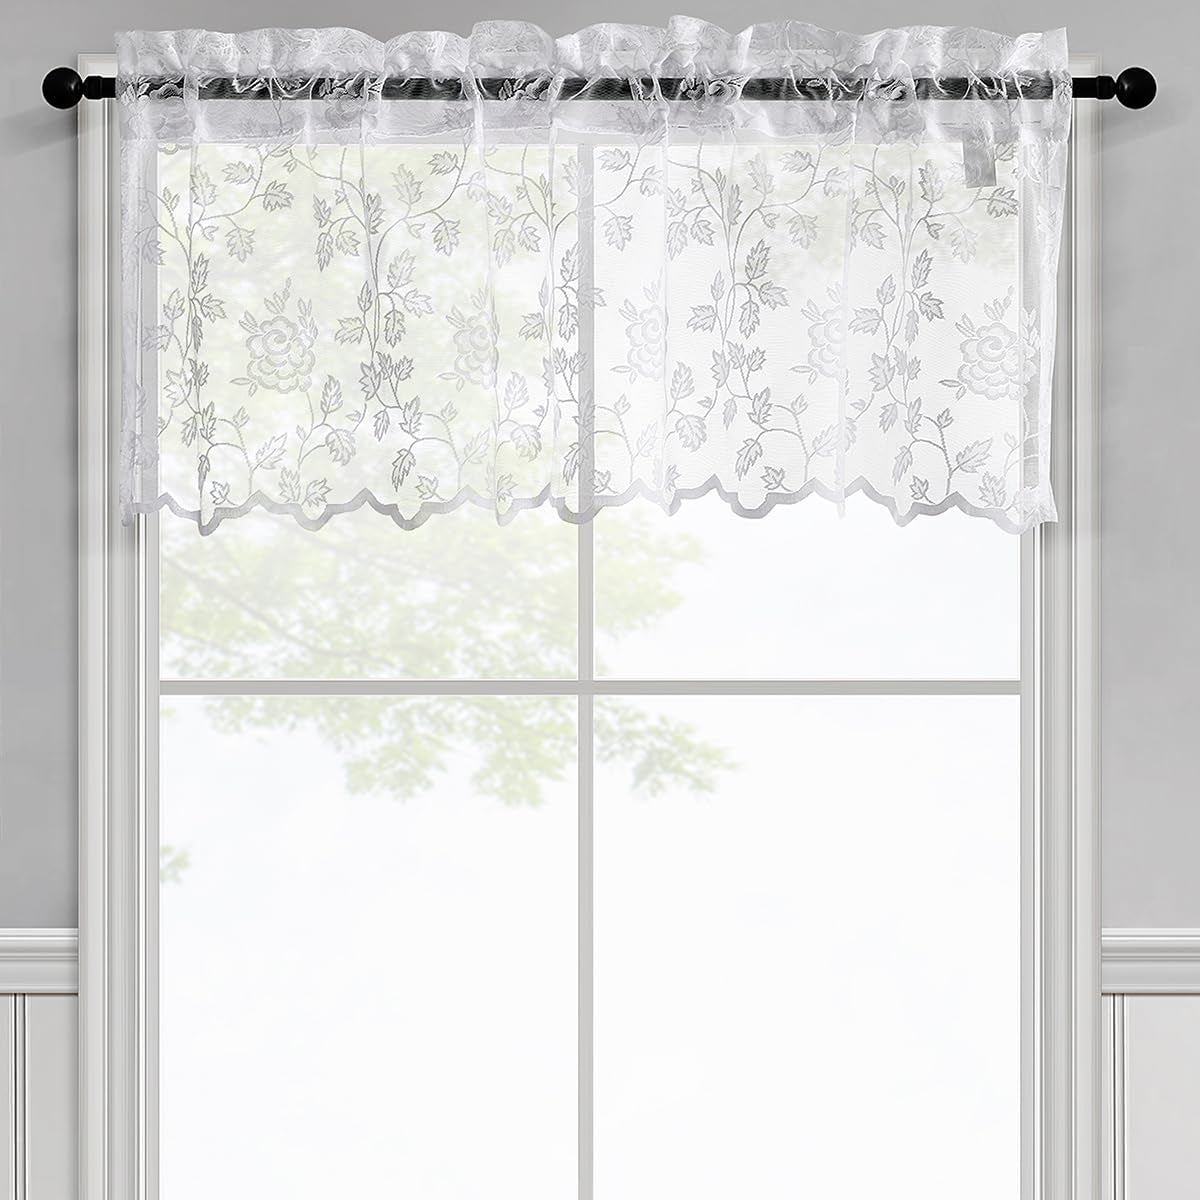 TERLYTEX White Lace Curtains 84 Inches Long, Country Vine Floral Embroidered Sheer Lace Curtains for Living Room, Privacy Scalloped Lace Sheer Curtains for Windows, 52 X 84 Inch, 2 Panels, White  TERLYTEX White W52 X L18 Inch 